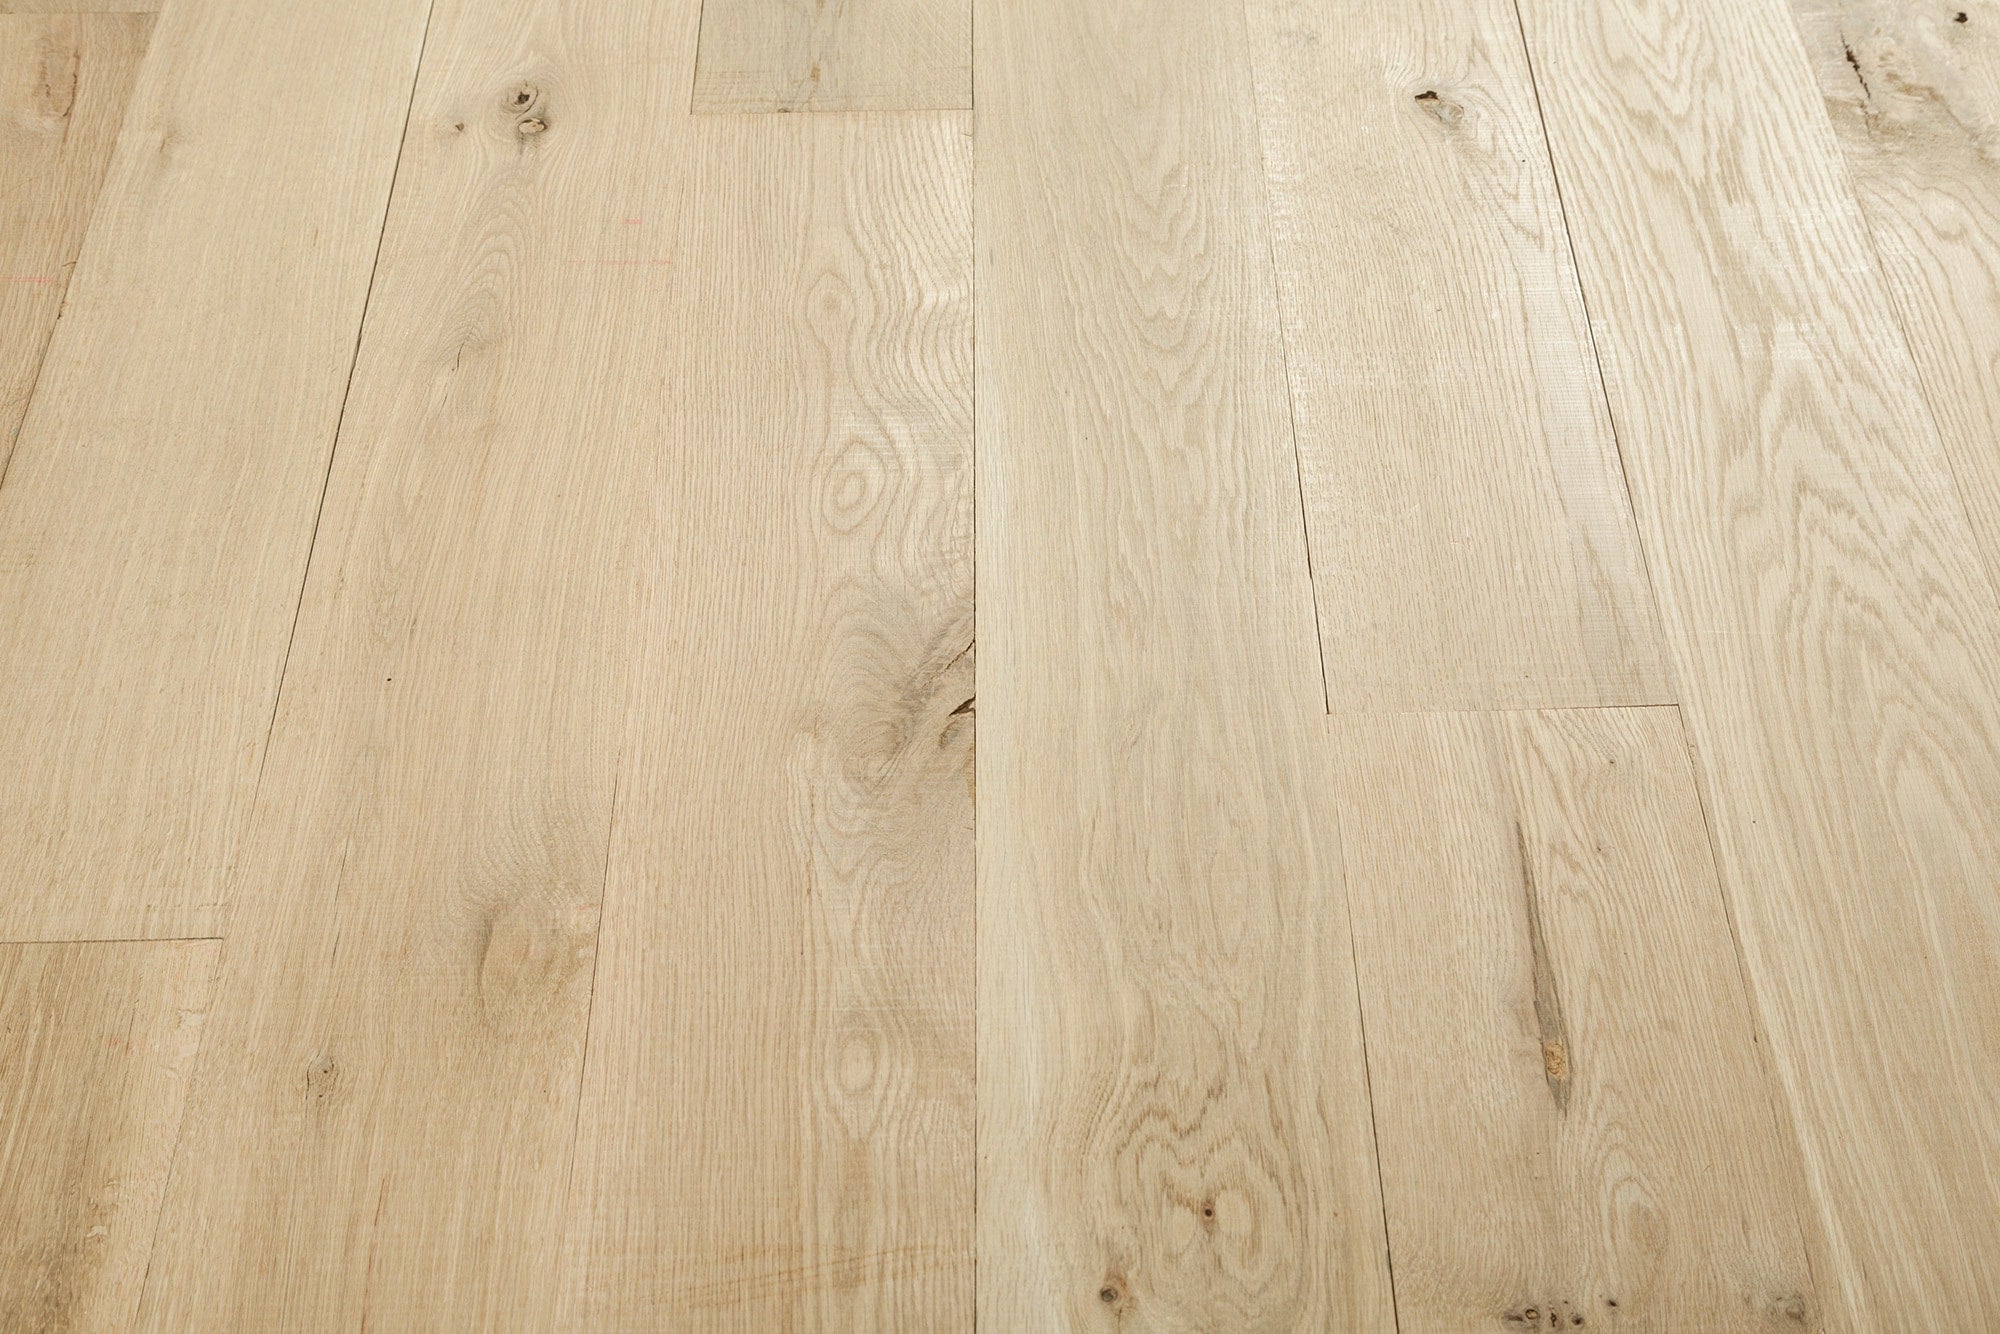 10 x 3/4 White Oak Character Live Sawn 5' to 12' Unfinished Solid